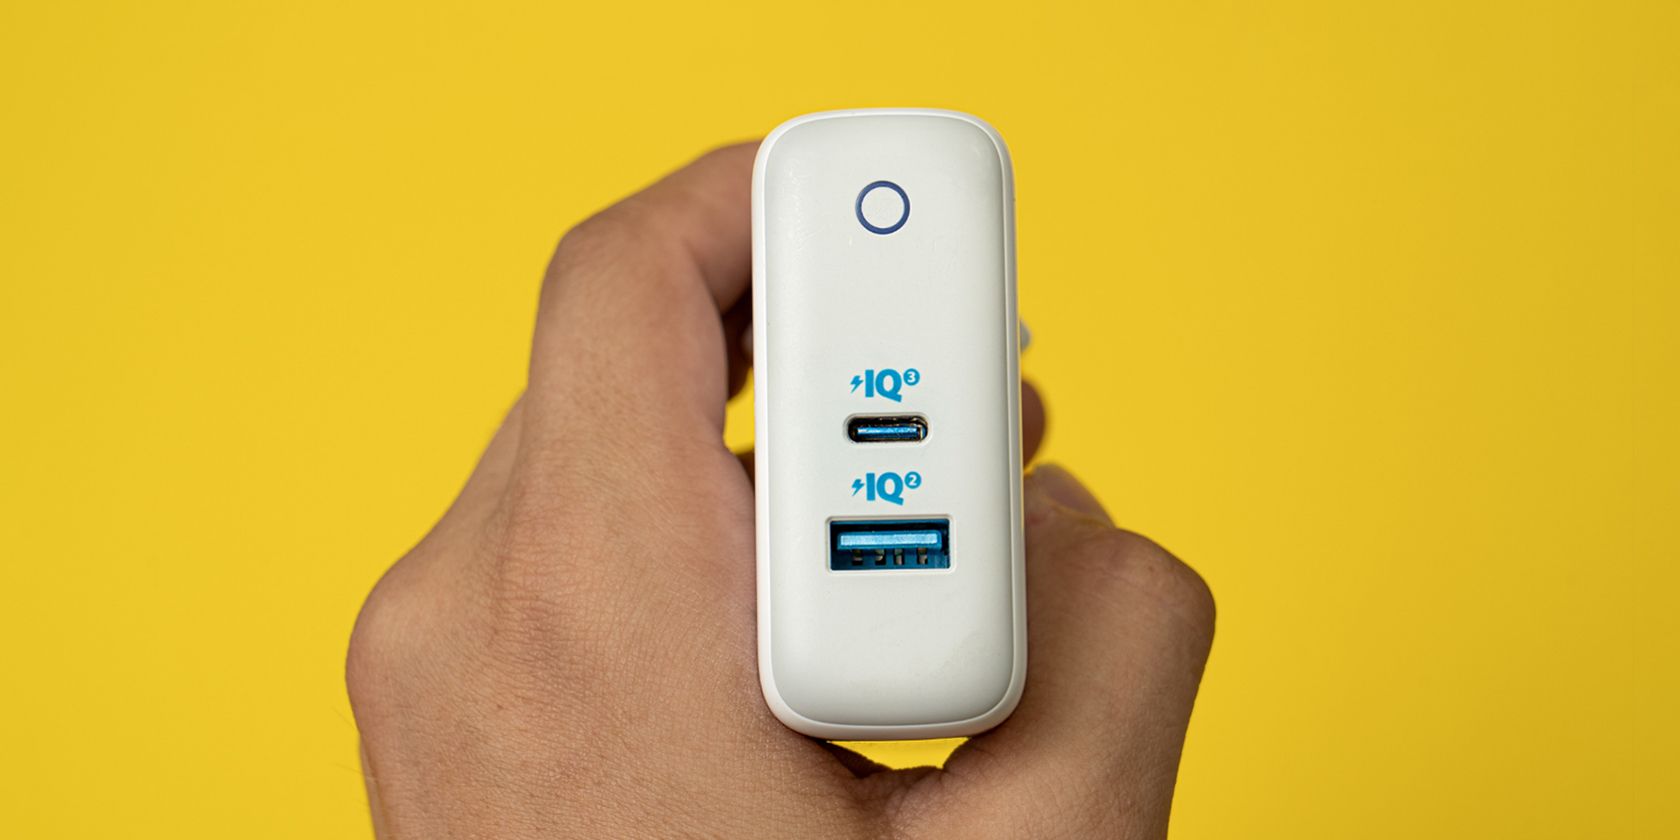 GaN charger held by a hand on a yellow background